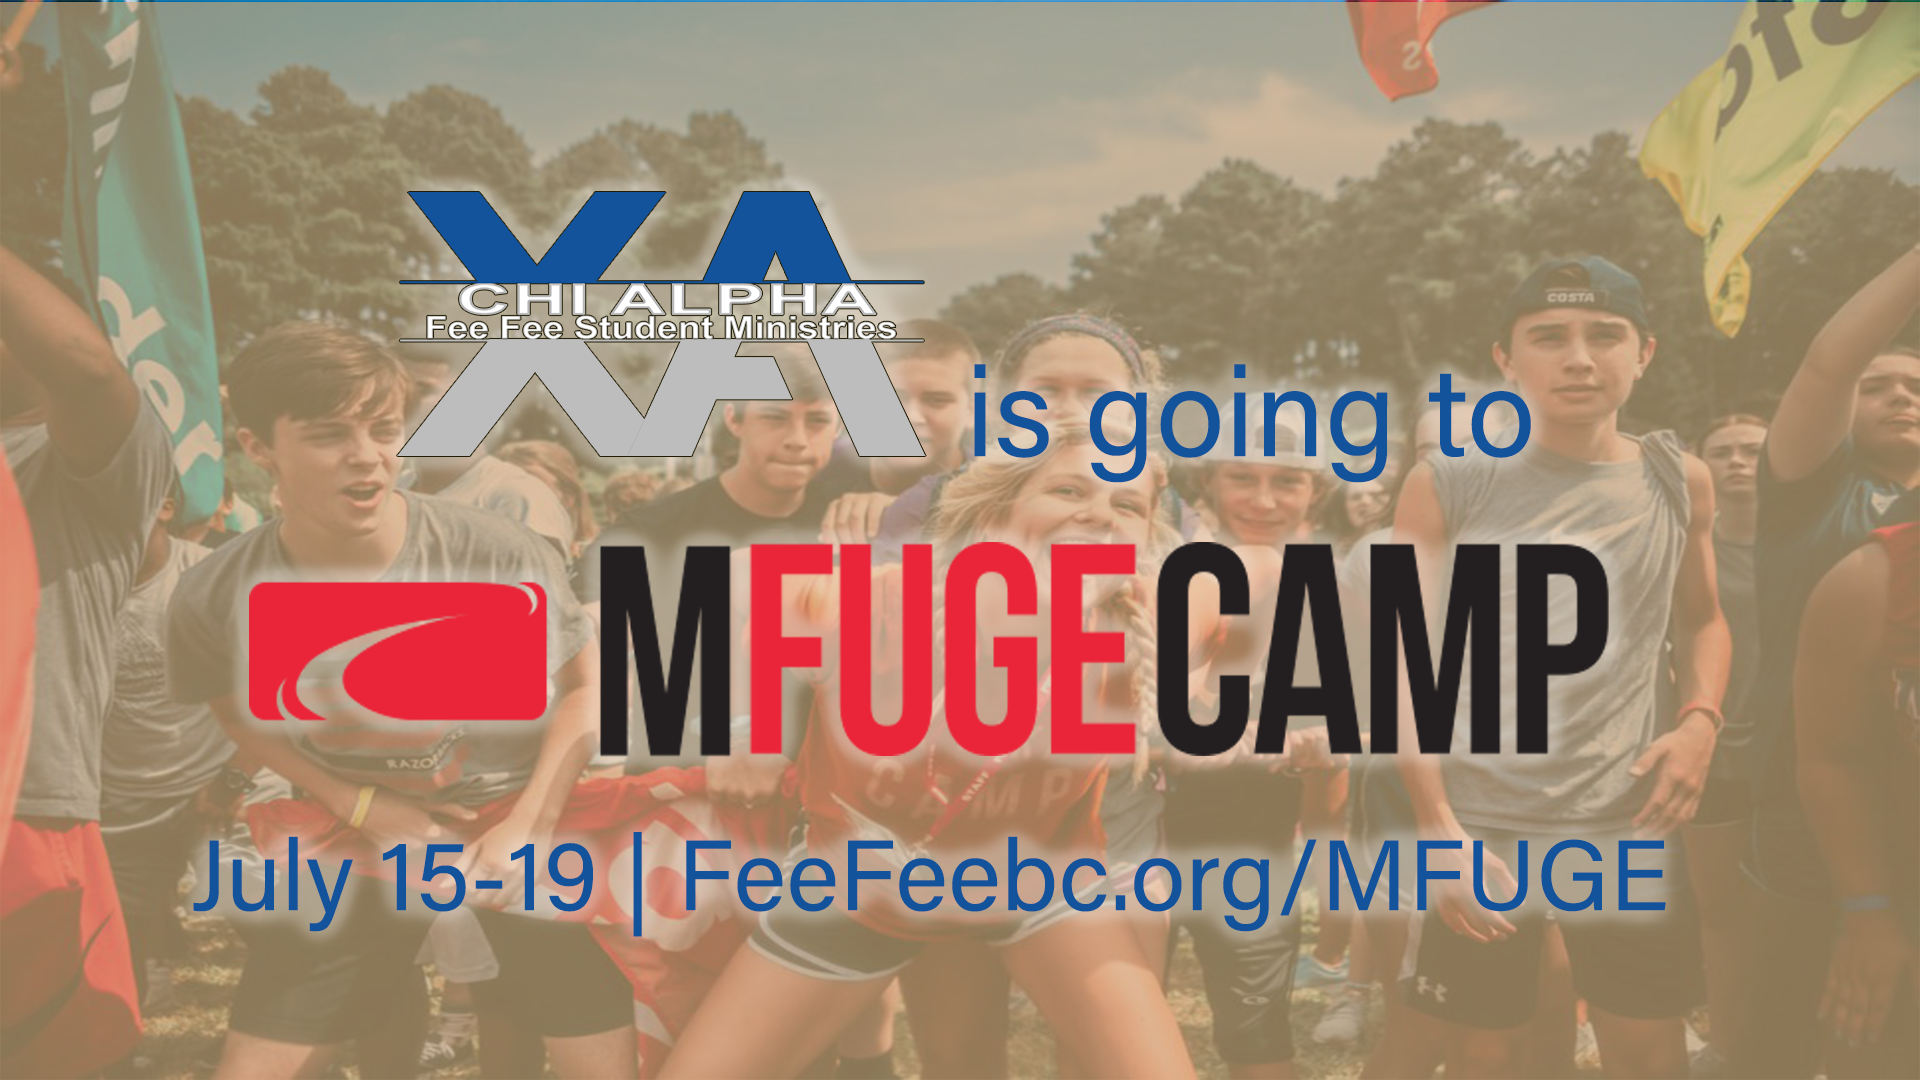 Chi Alpha is going to MFuge Camp July 15-19